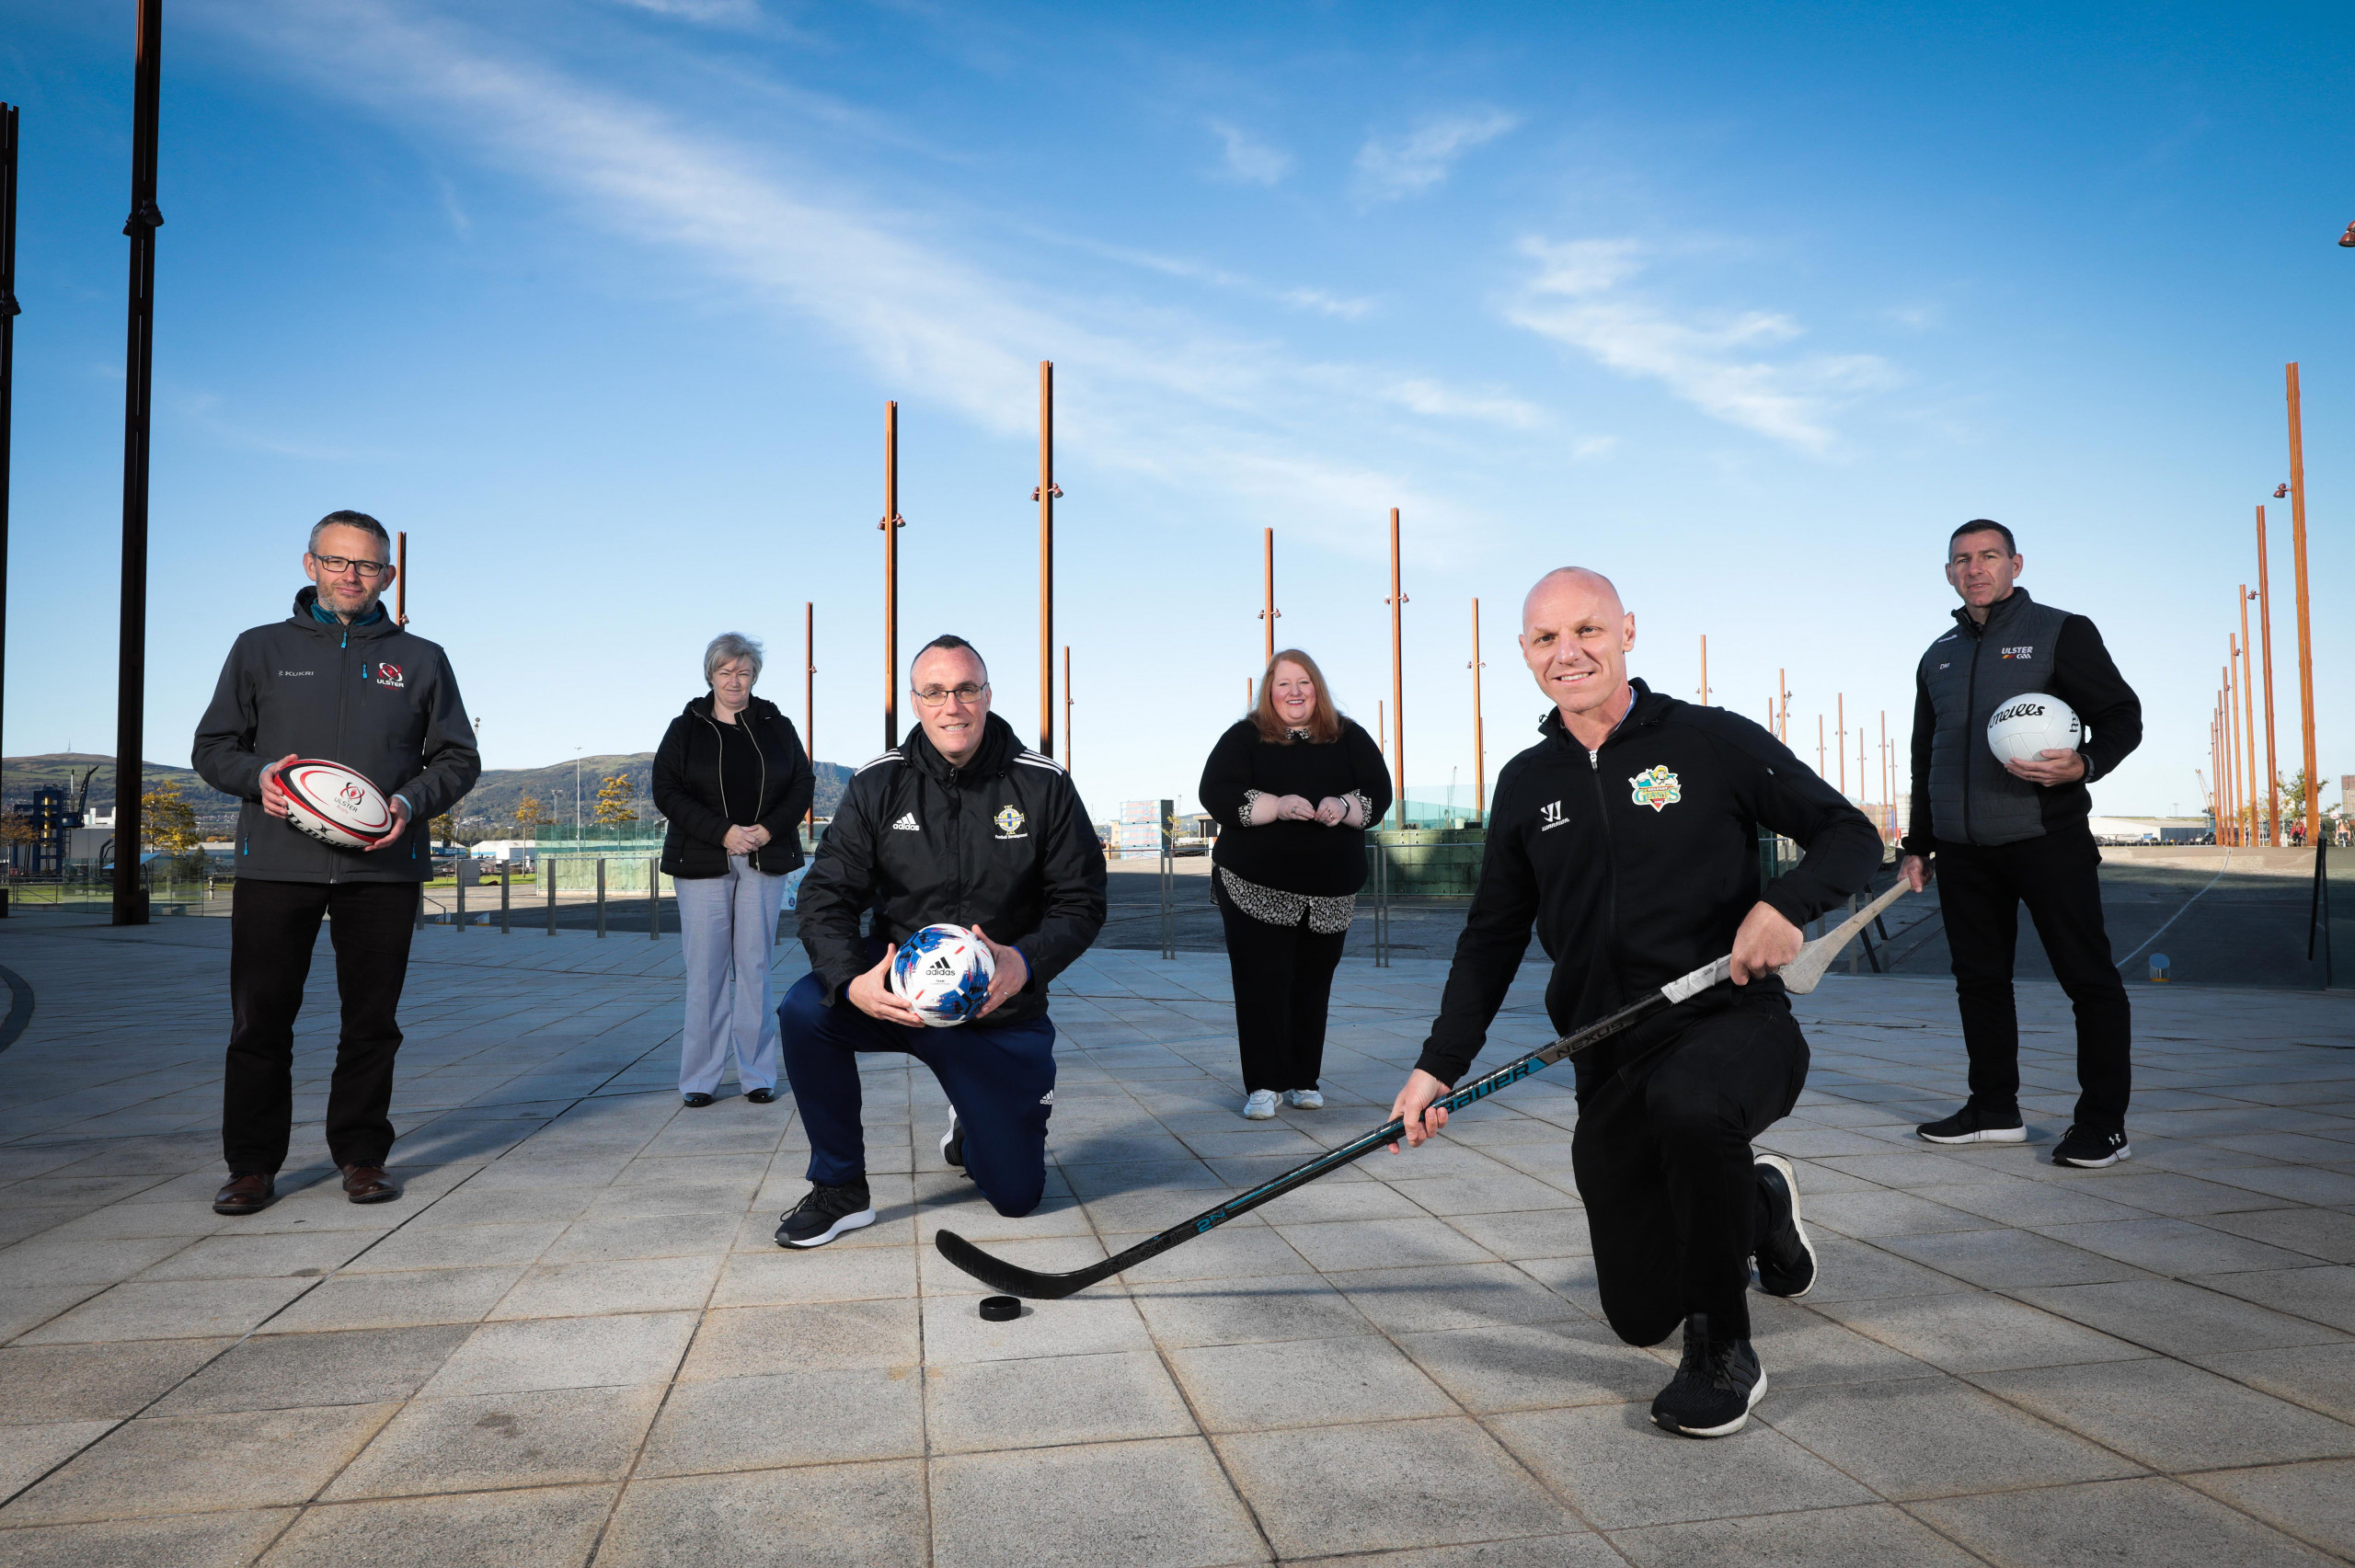 Ulster GAA join fellow sporting organisations to deliver new and innovative programme